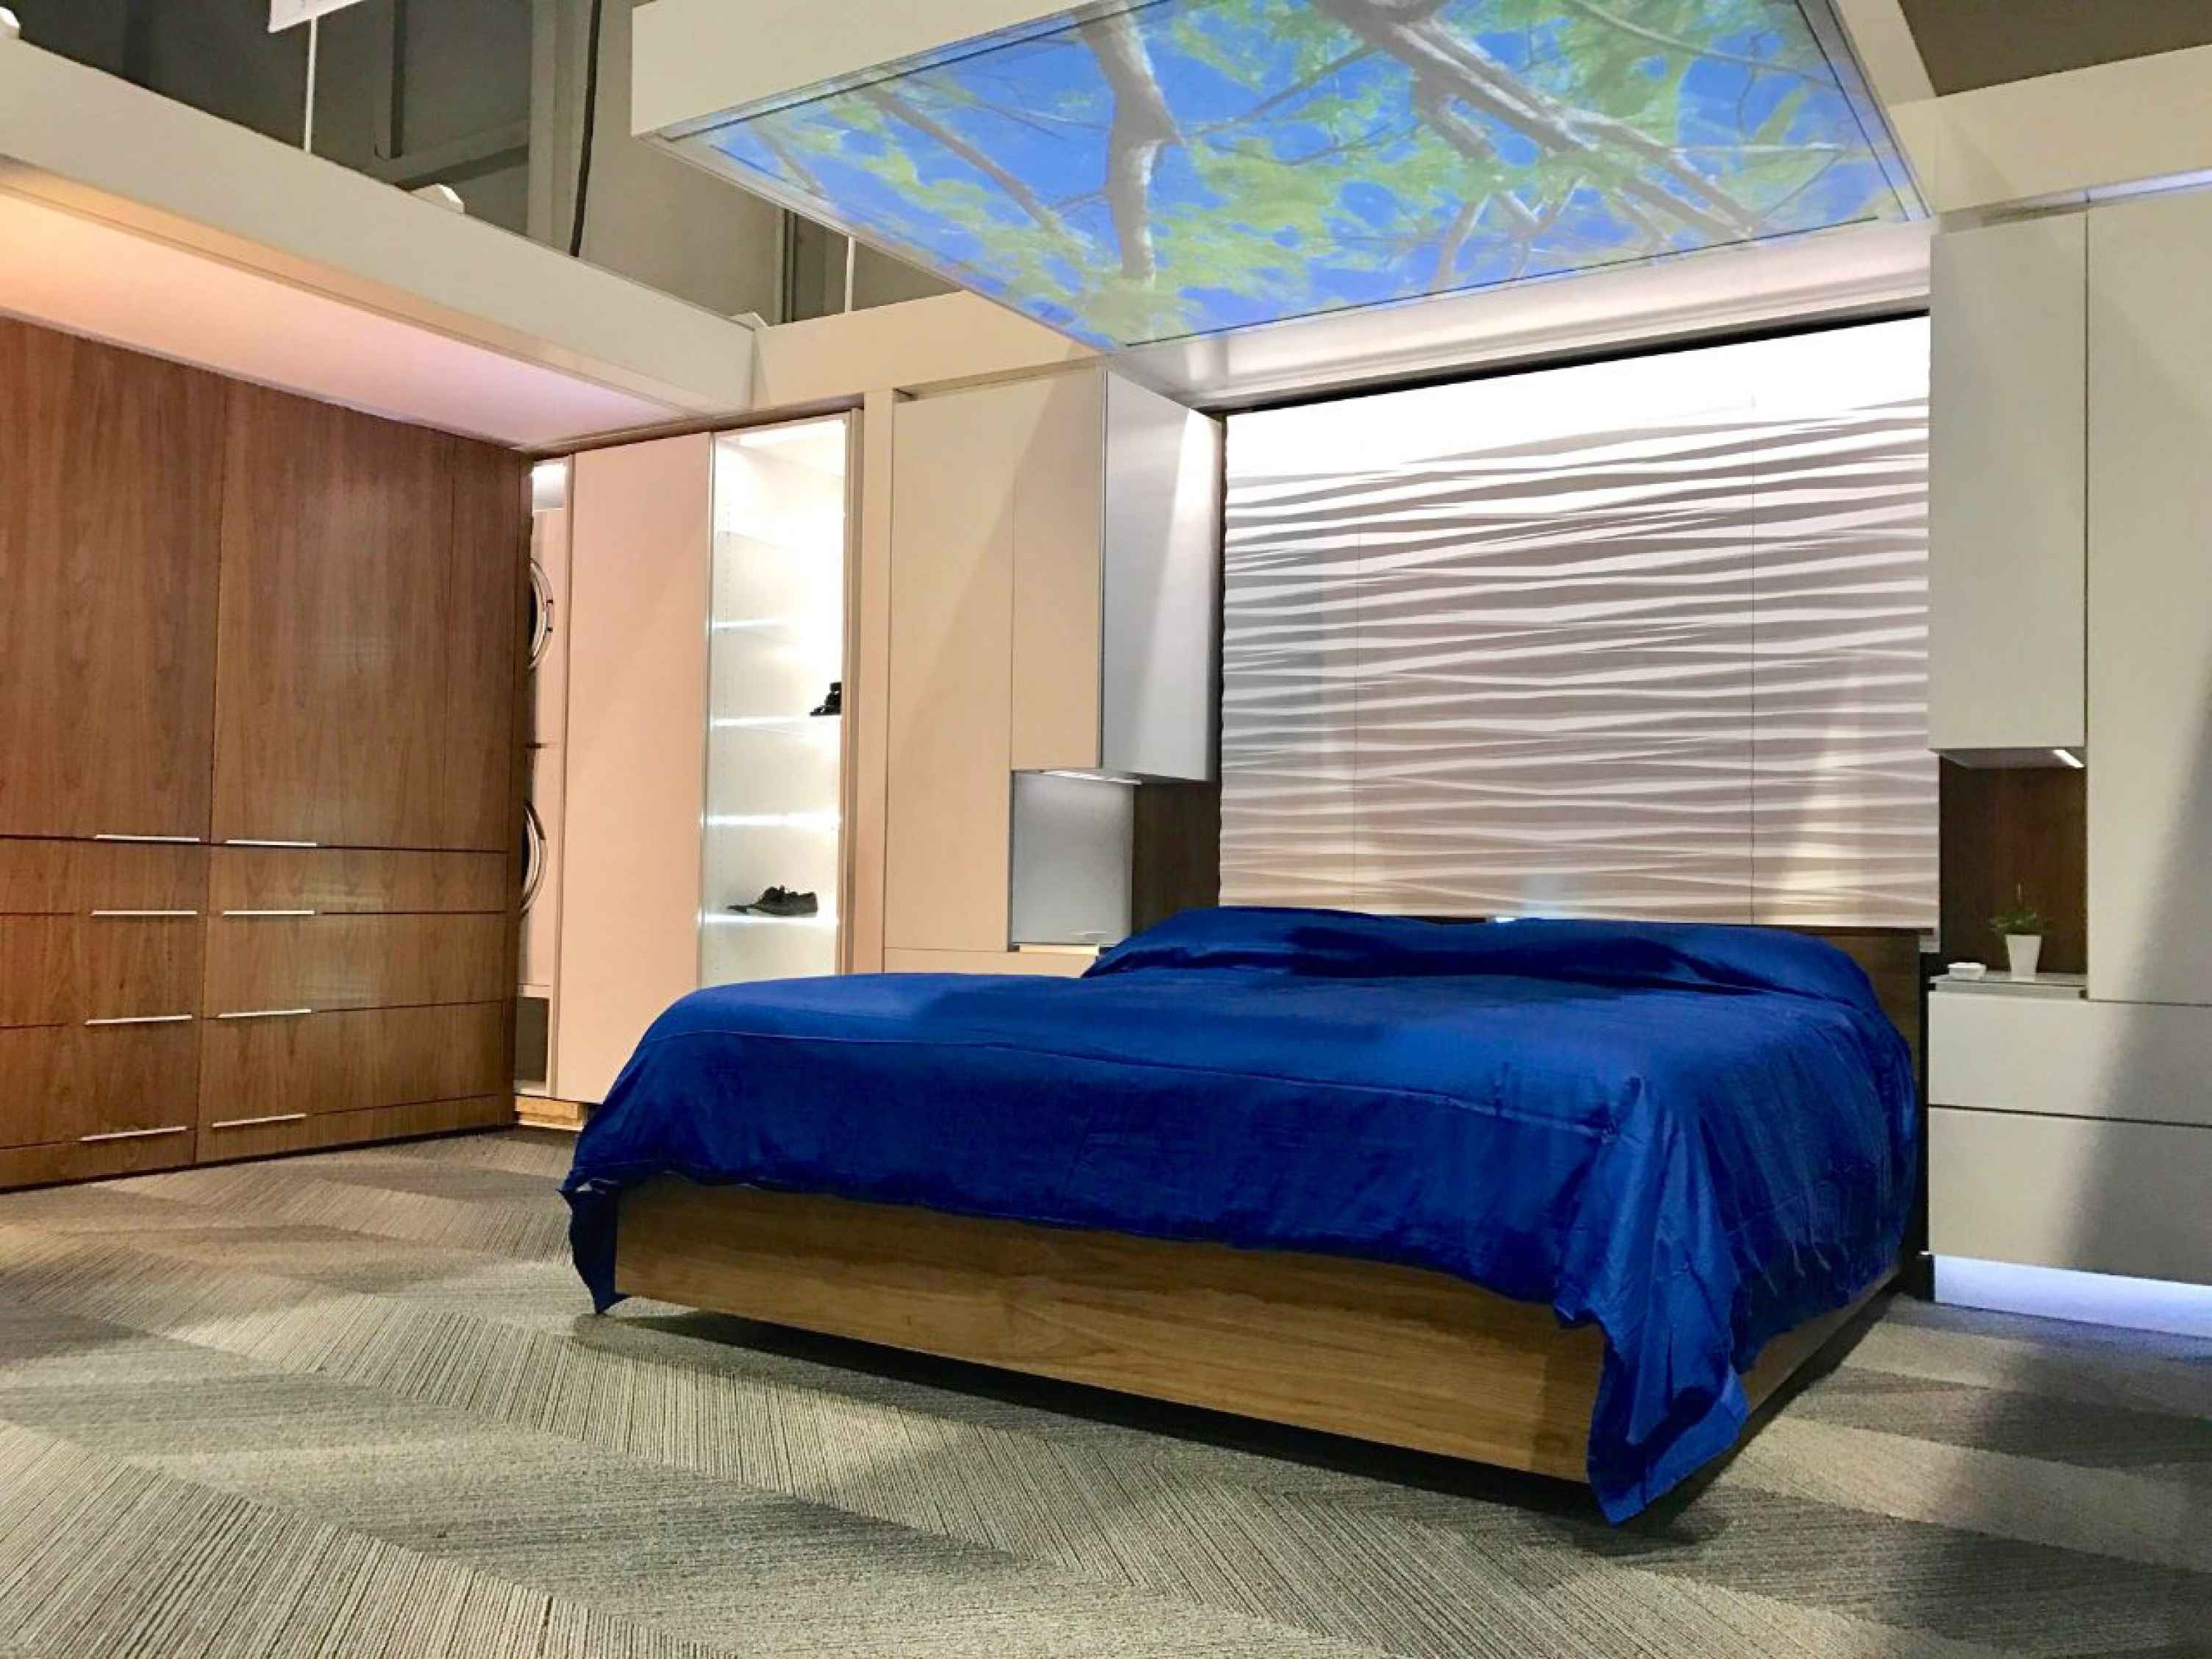 The FutureHAUS bedroom has a multimedia canopy bed screen that can project everything from TV and Internet to ambient lighting and user-responsive sleep scenes.